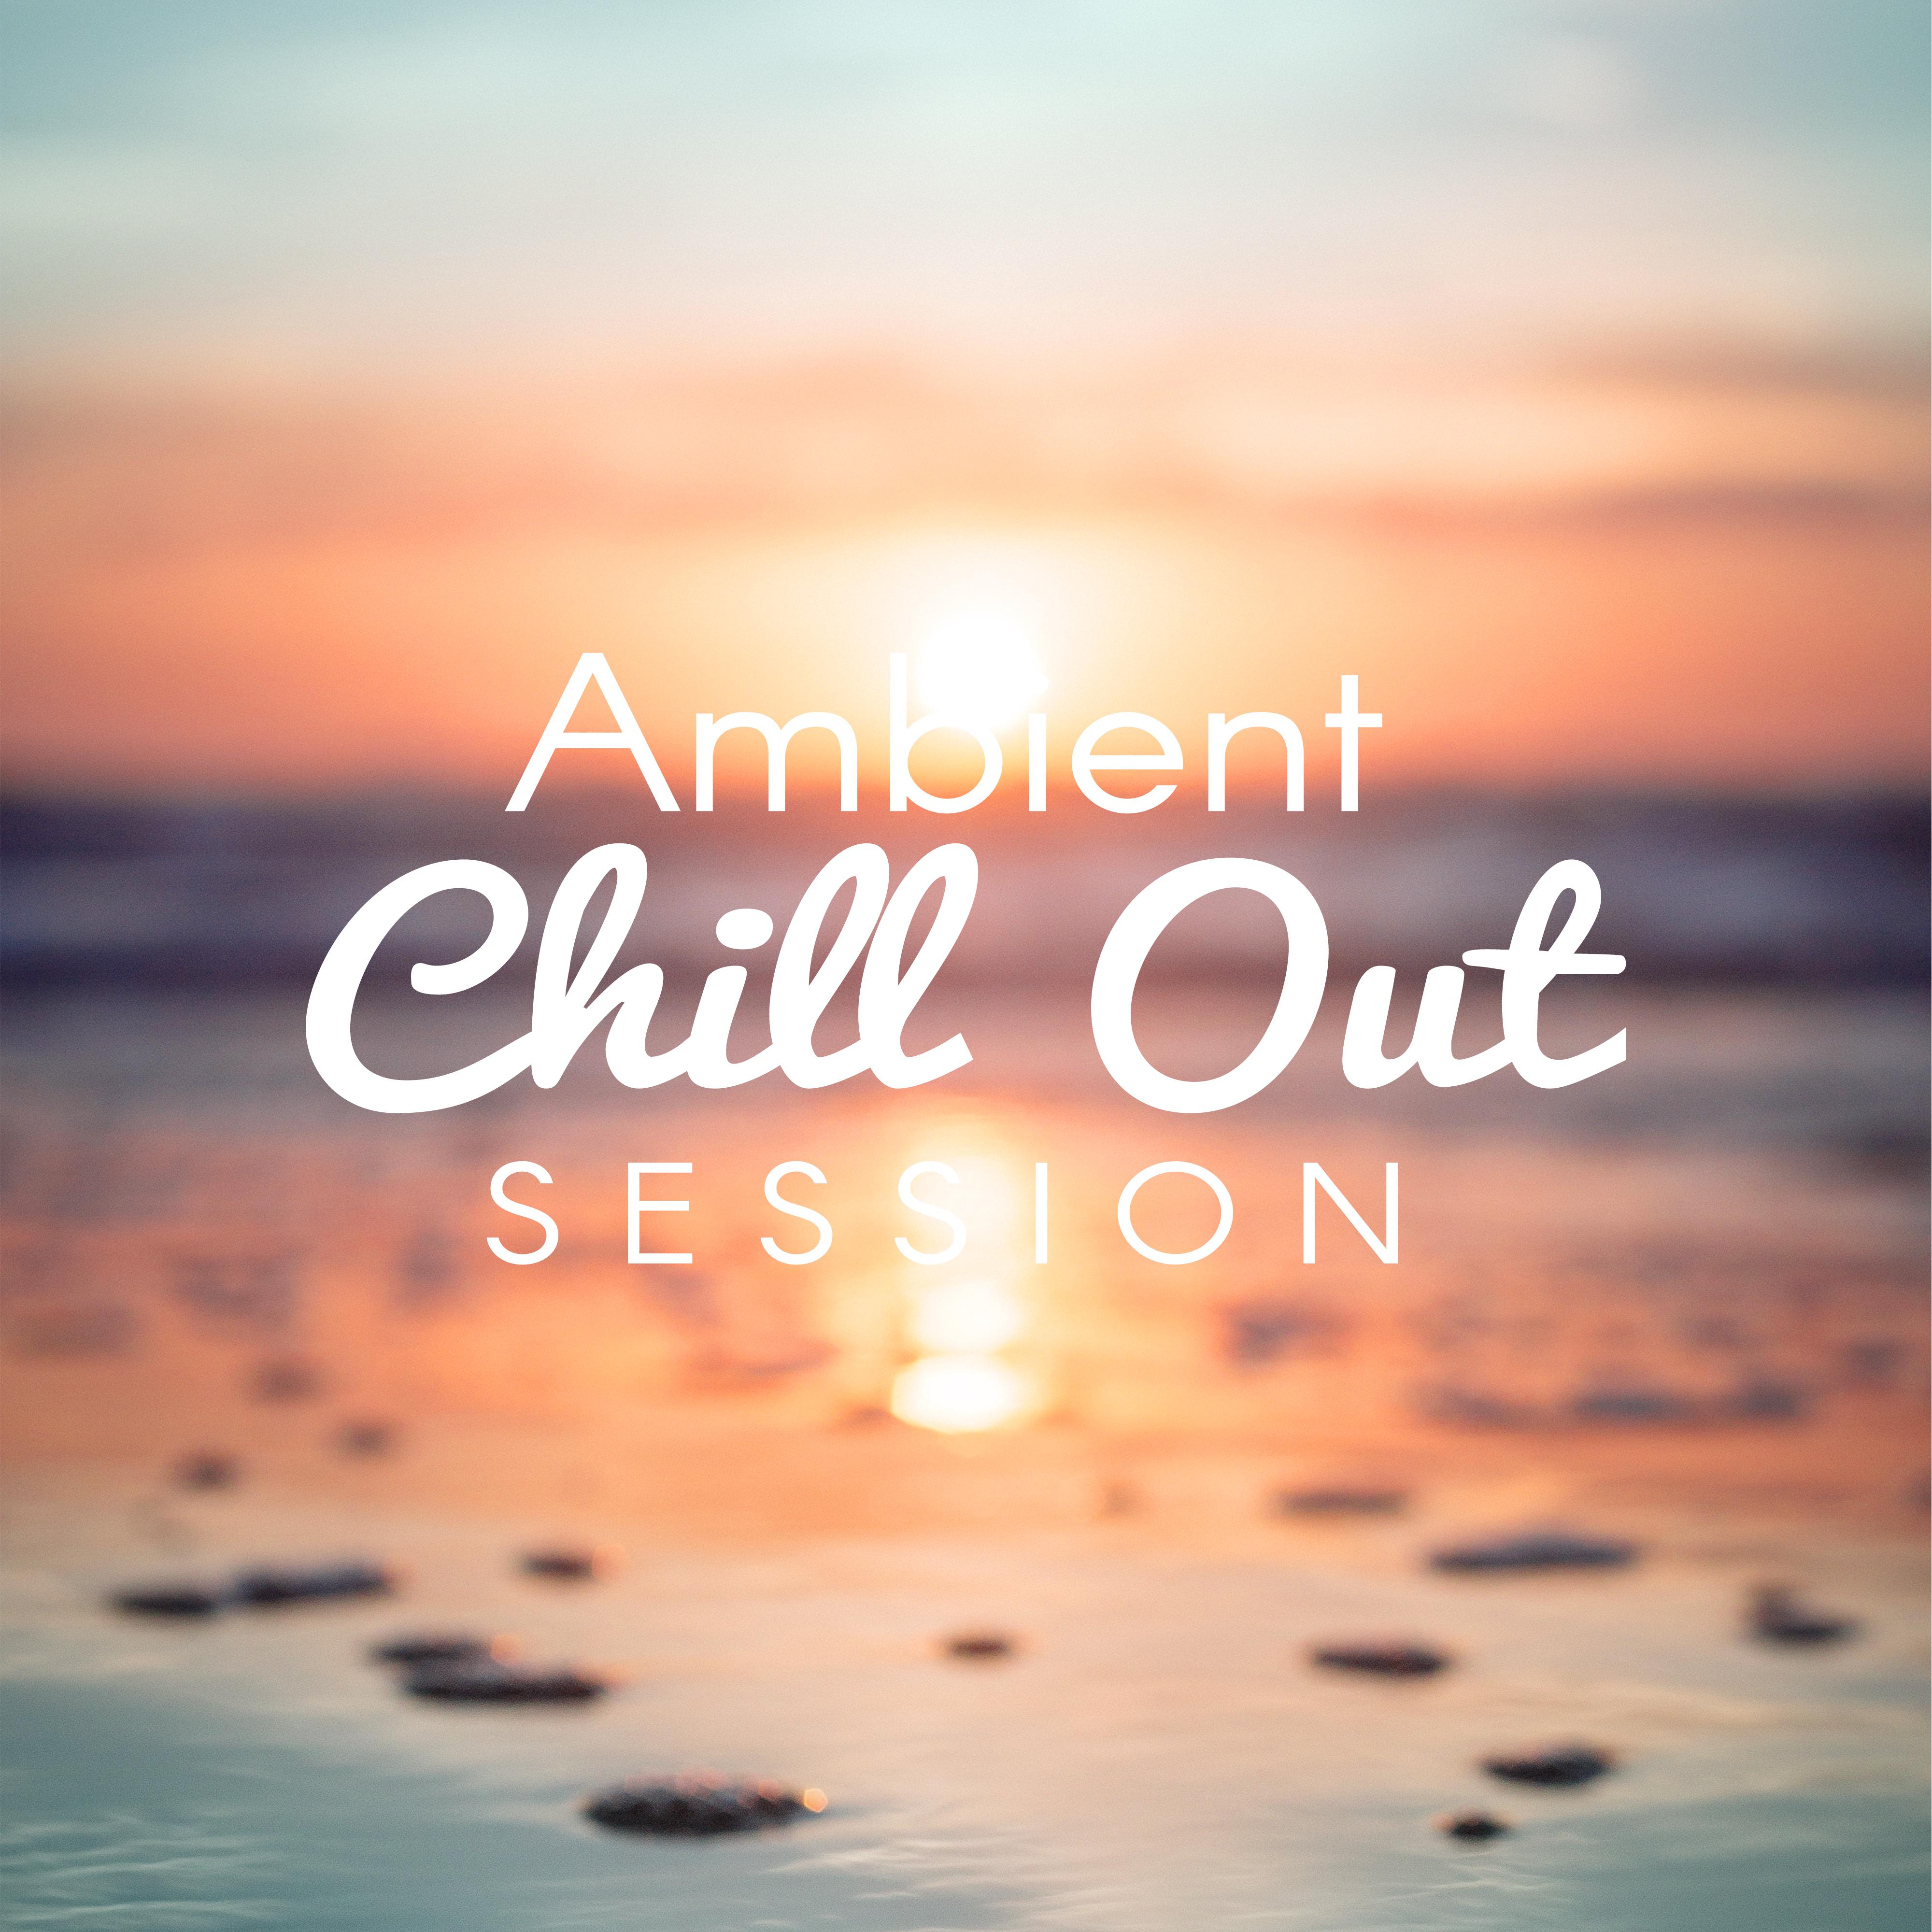 Ambient Chill Out Session  Relaxing Chill Out Music, Electronic Vibrations, Downbeat, Mr Chillout